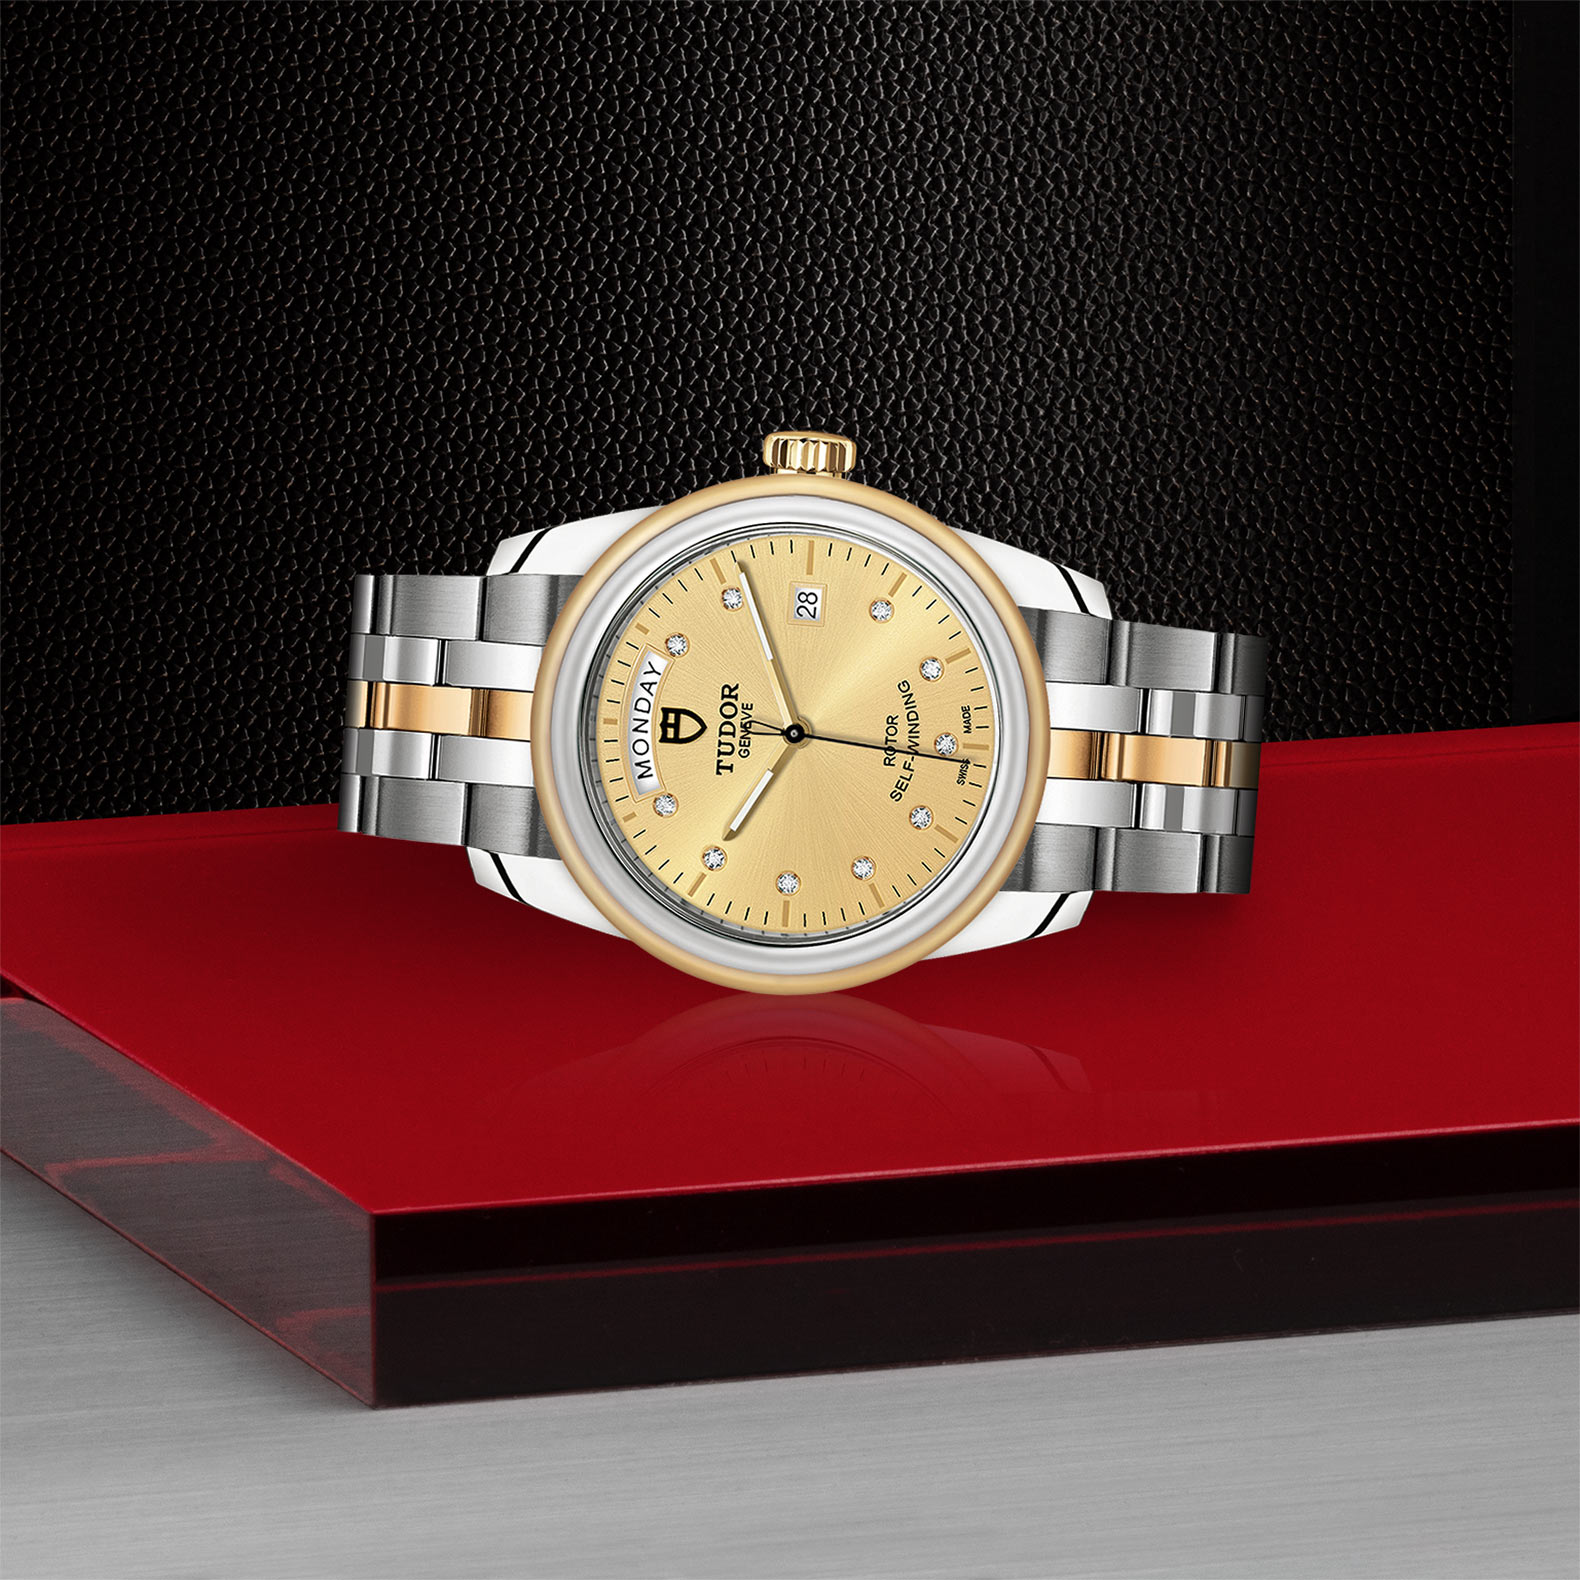 TUDOR Glamour Date+Day - M56003-0006